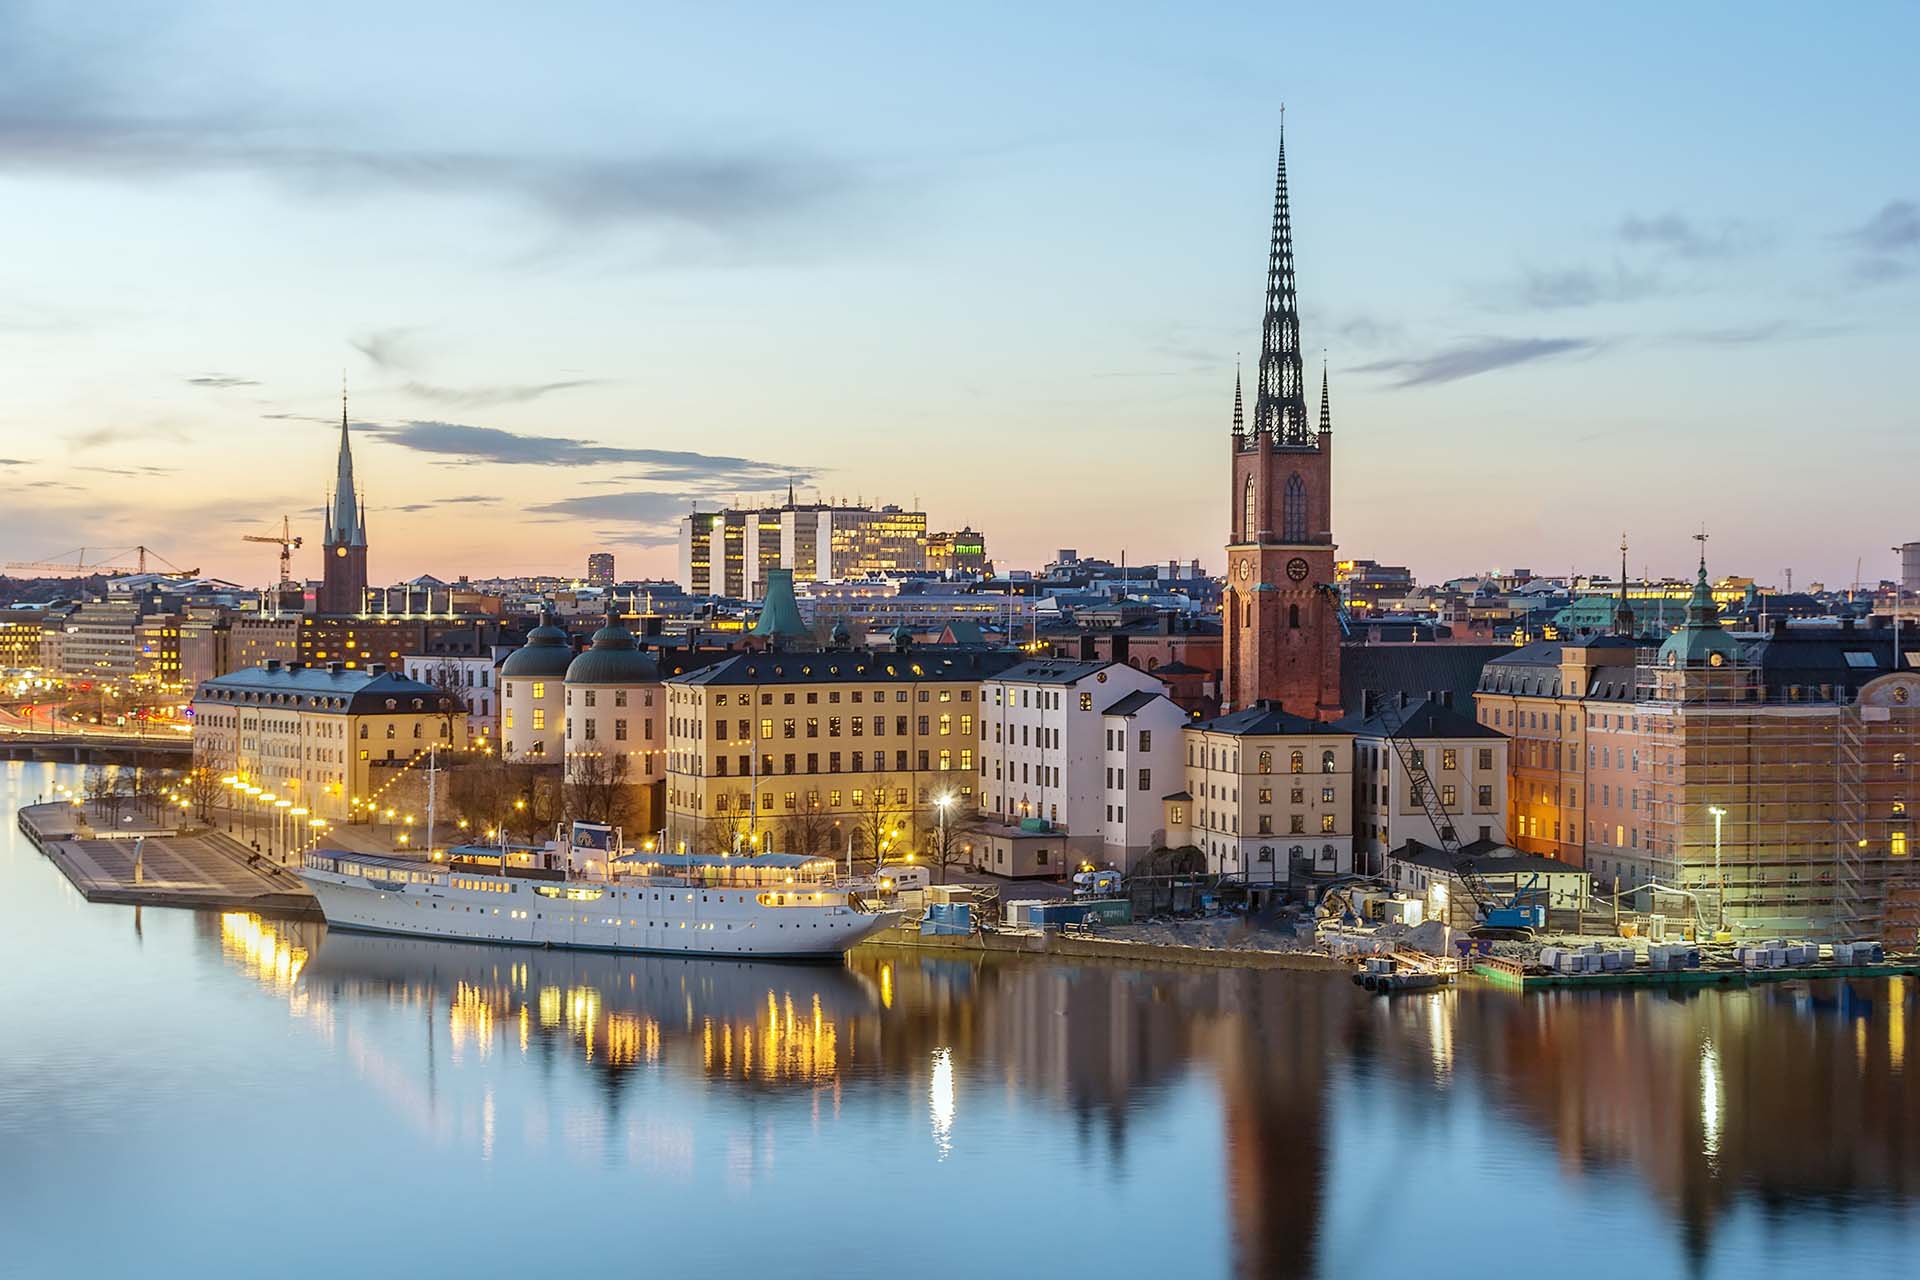 view of Riddarholmen from the Sodermalm island in Stockholm, Sweden